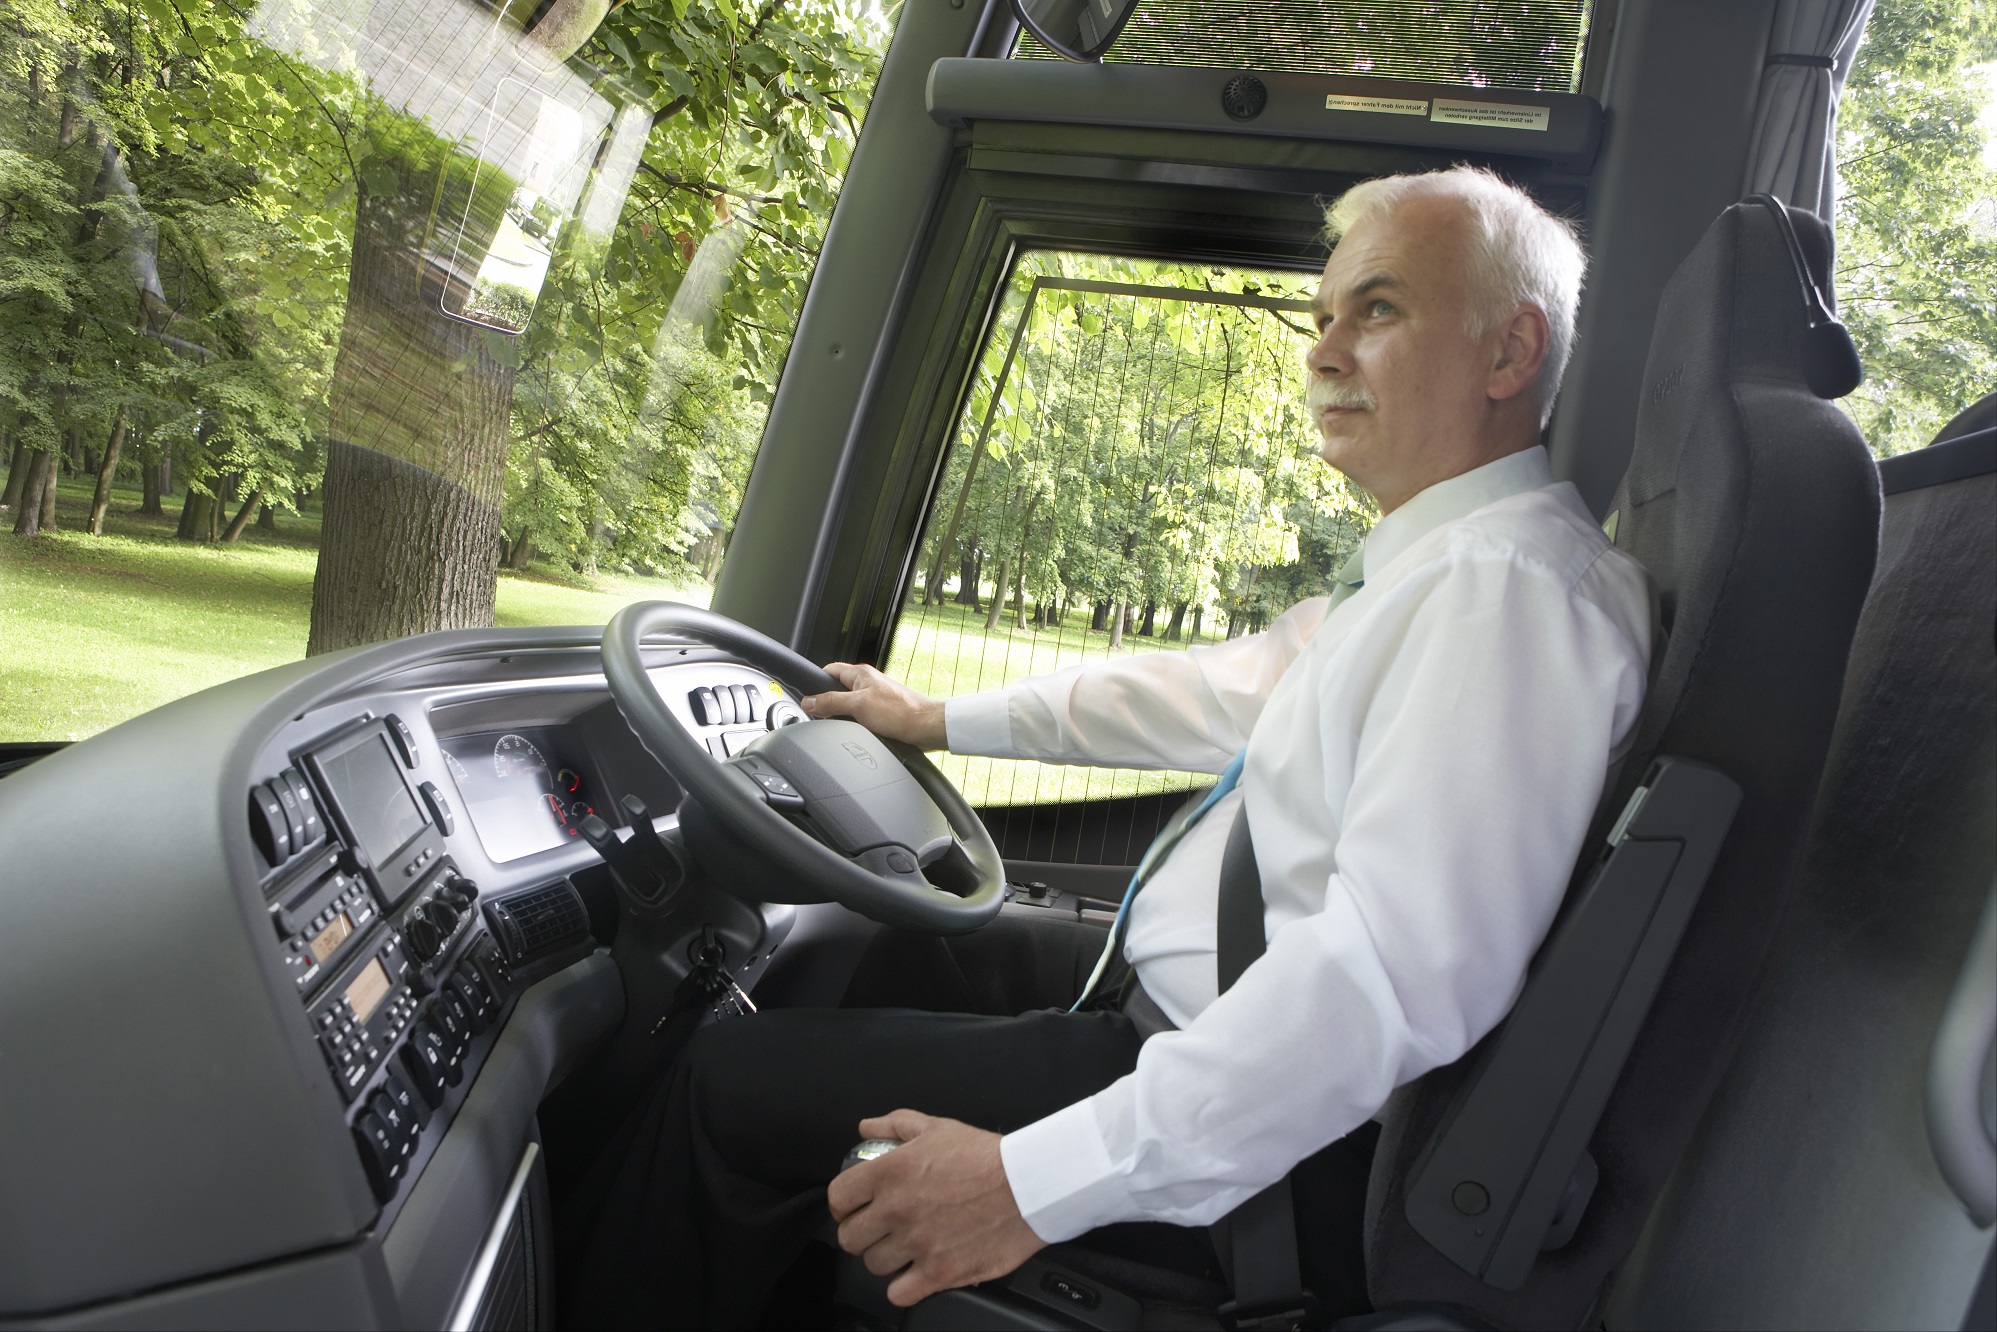 Minister Richard Holden briefed on scale of coach and bus driver shortage